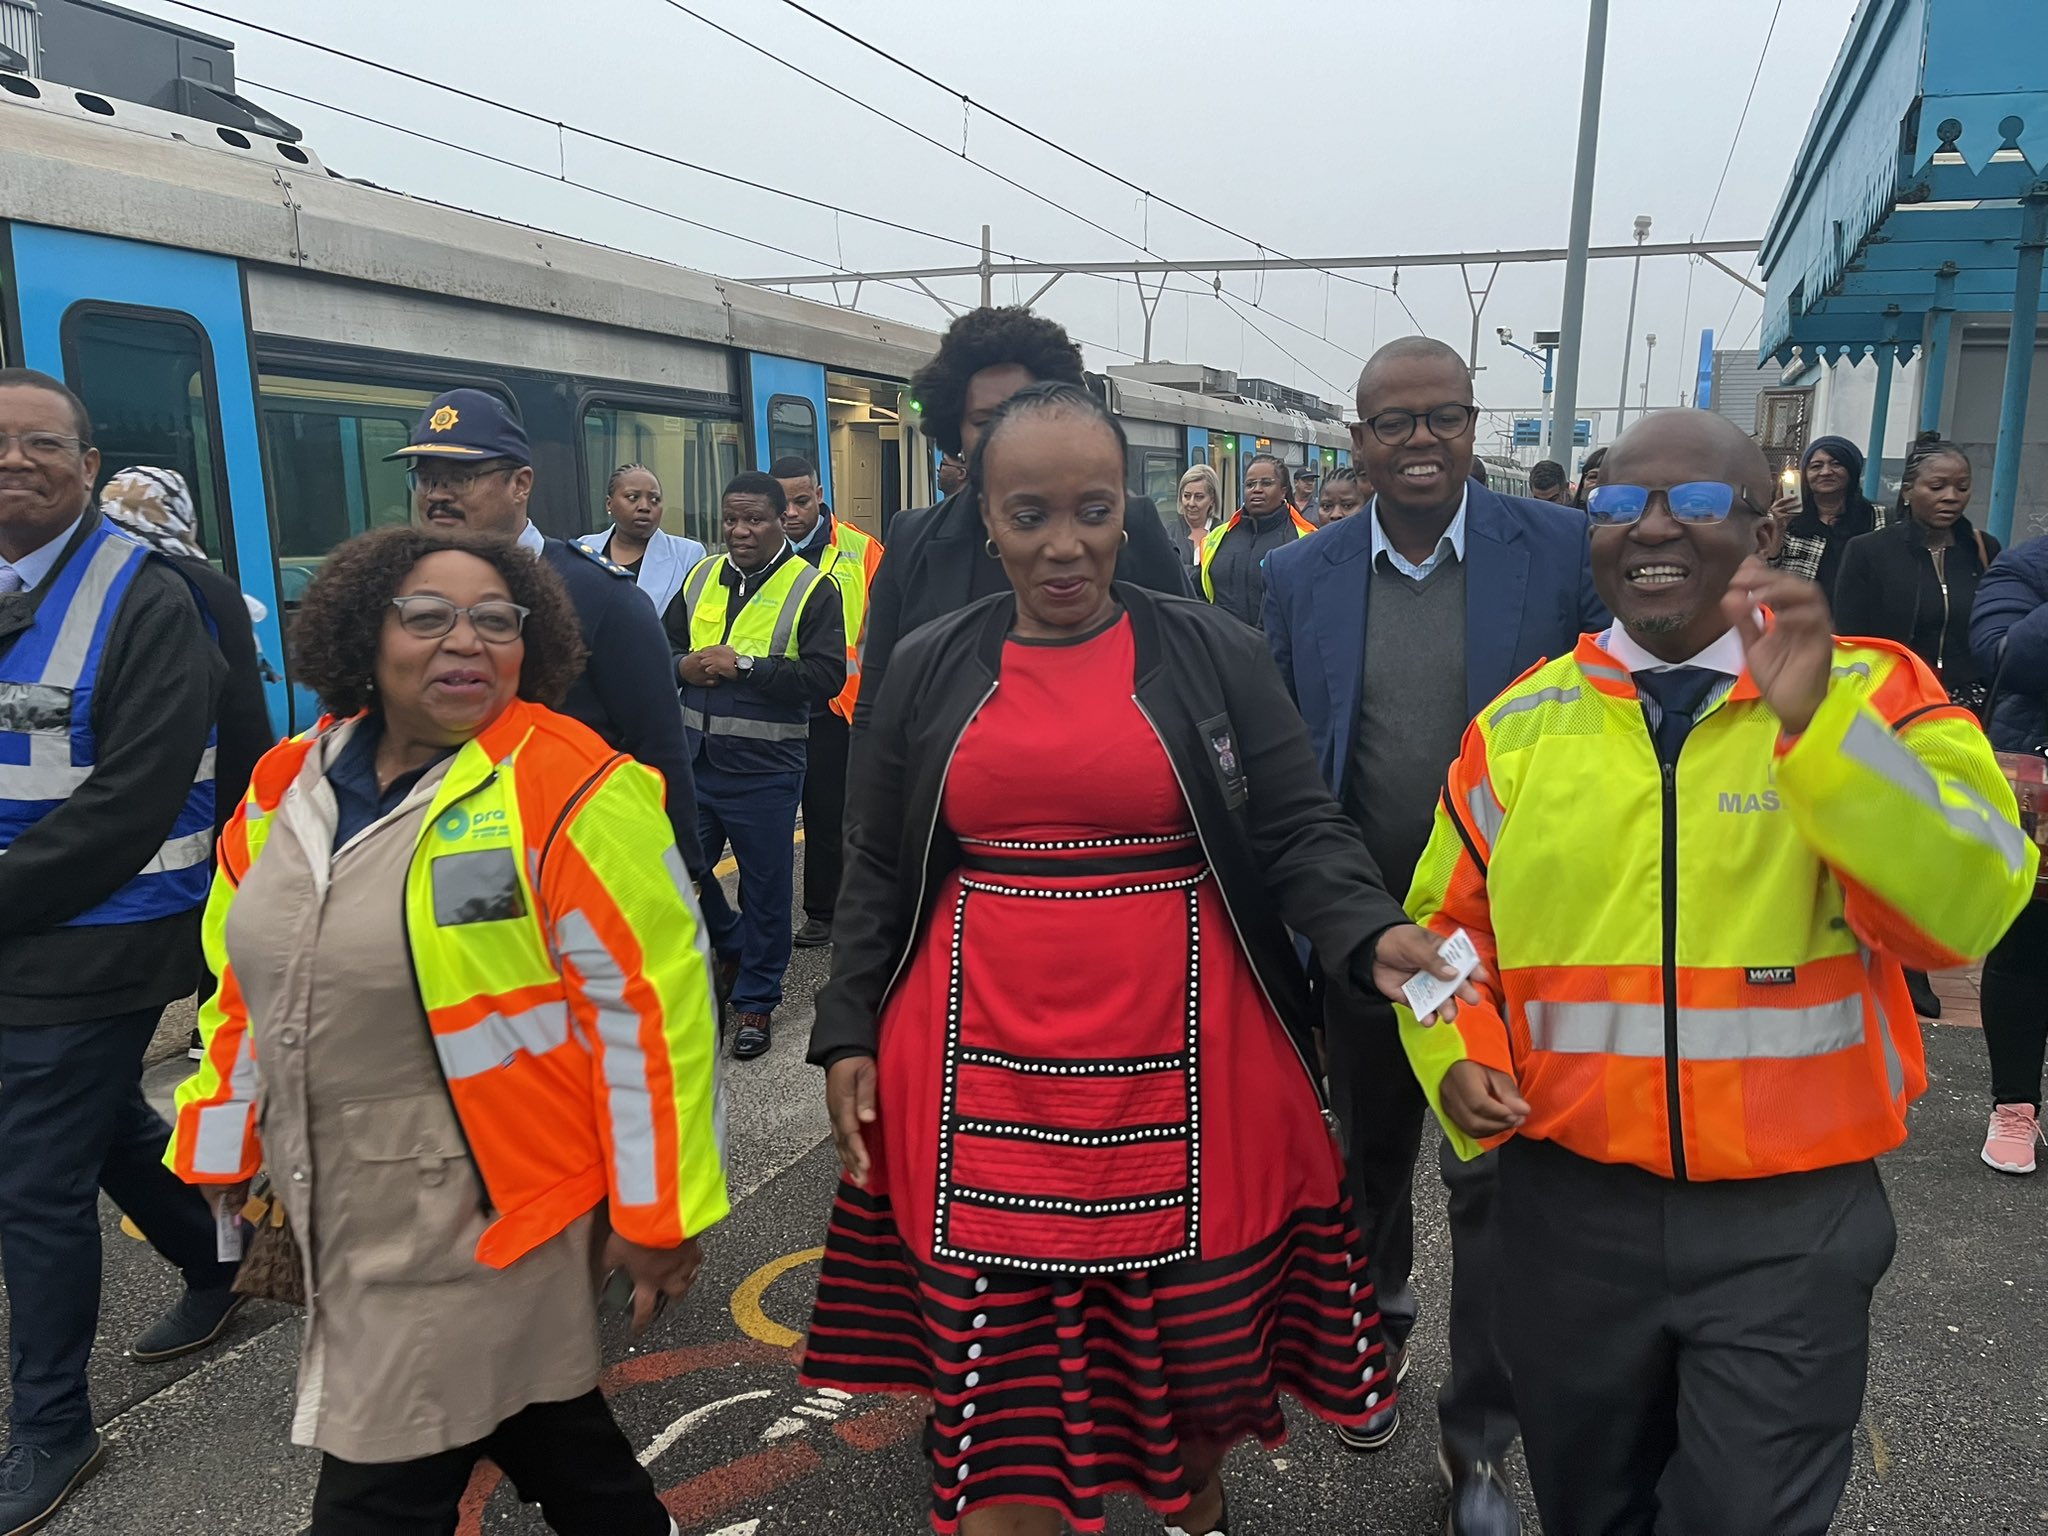 Minister Chikunga to officially launch new electric trains in Cape Town